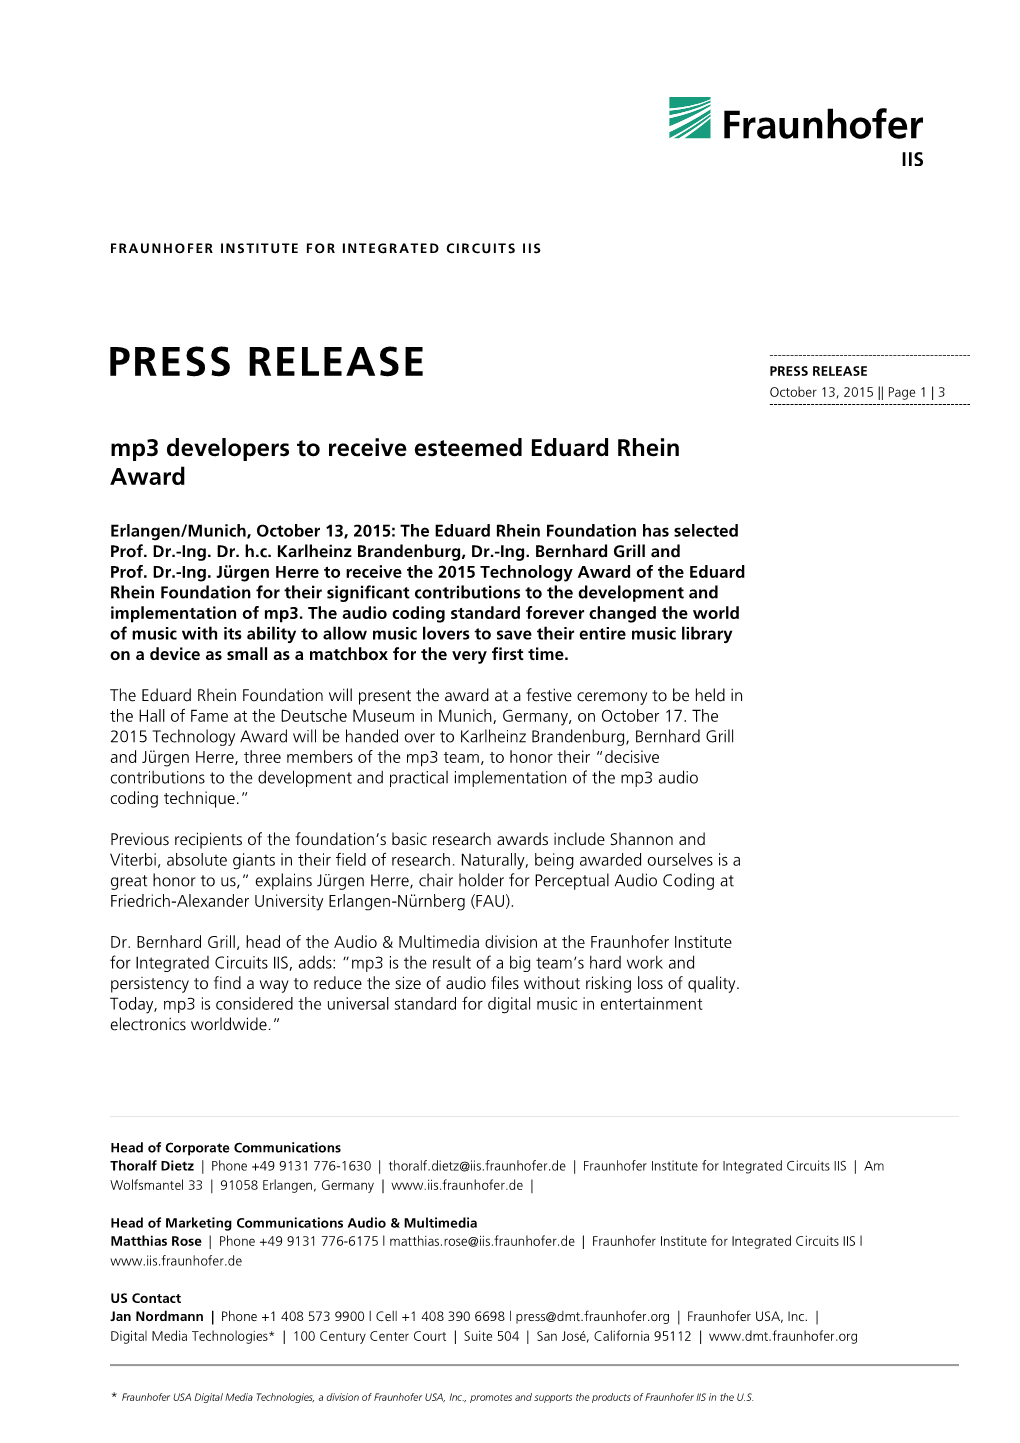 PRESS RELEASE PRESS RELEASE October 13, 2015 || Page 1 | 3